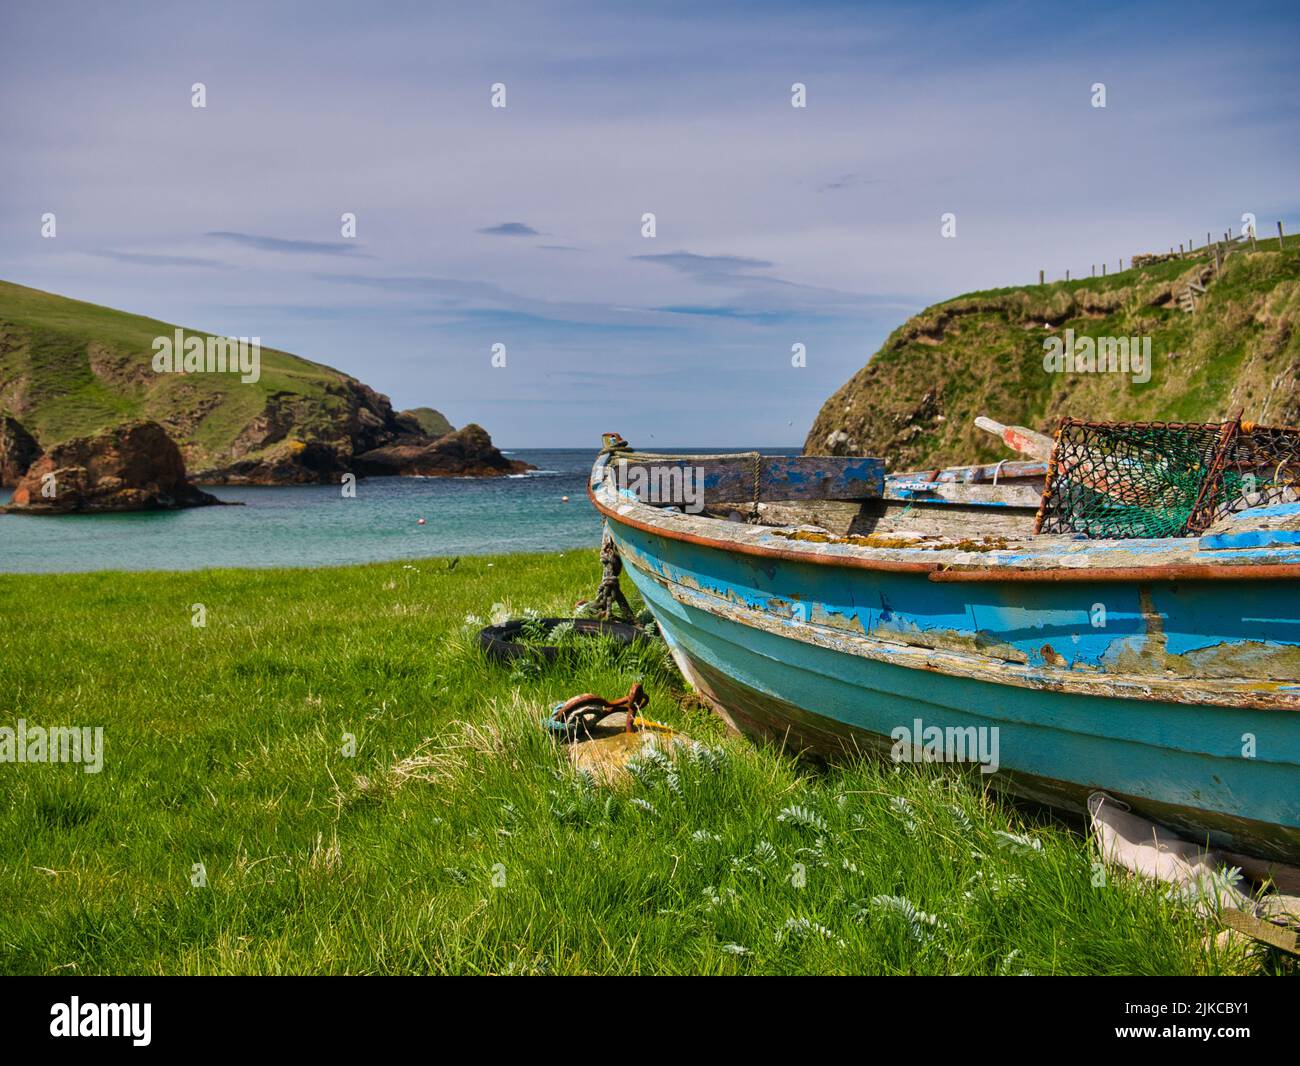 An old, abandoned, blue, wooden fishing boat near a beach in southern Shetland, UK. Weathered oars and a rusting creel can be seen aboard. Stock Photo